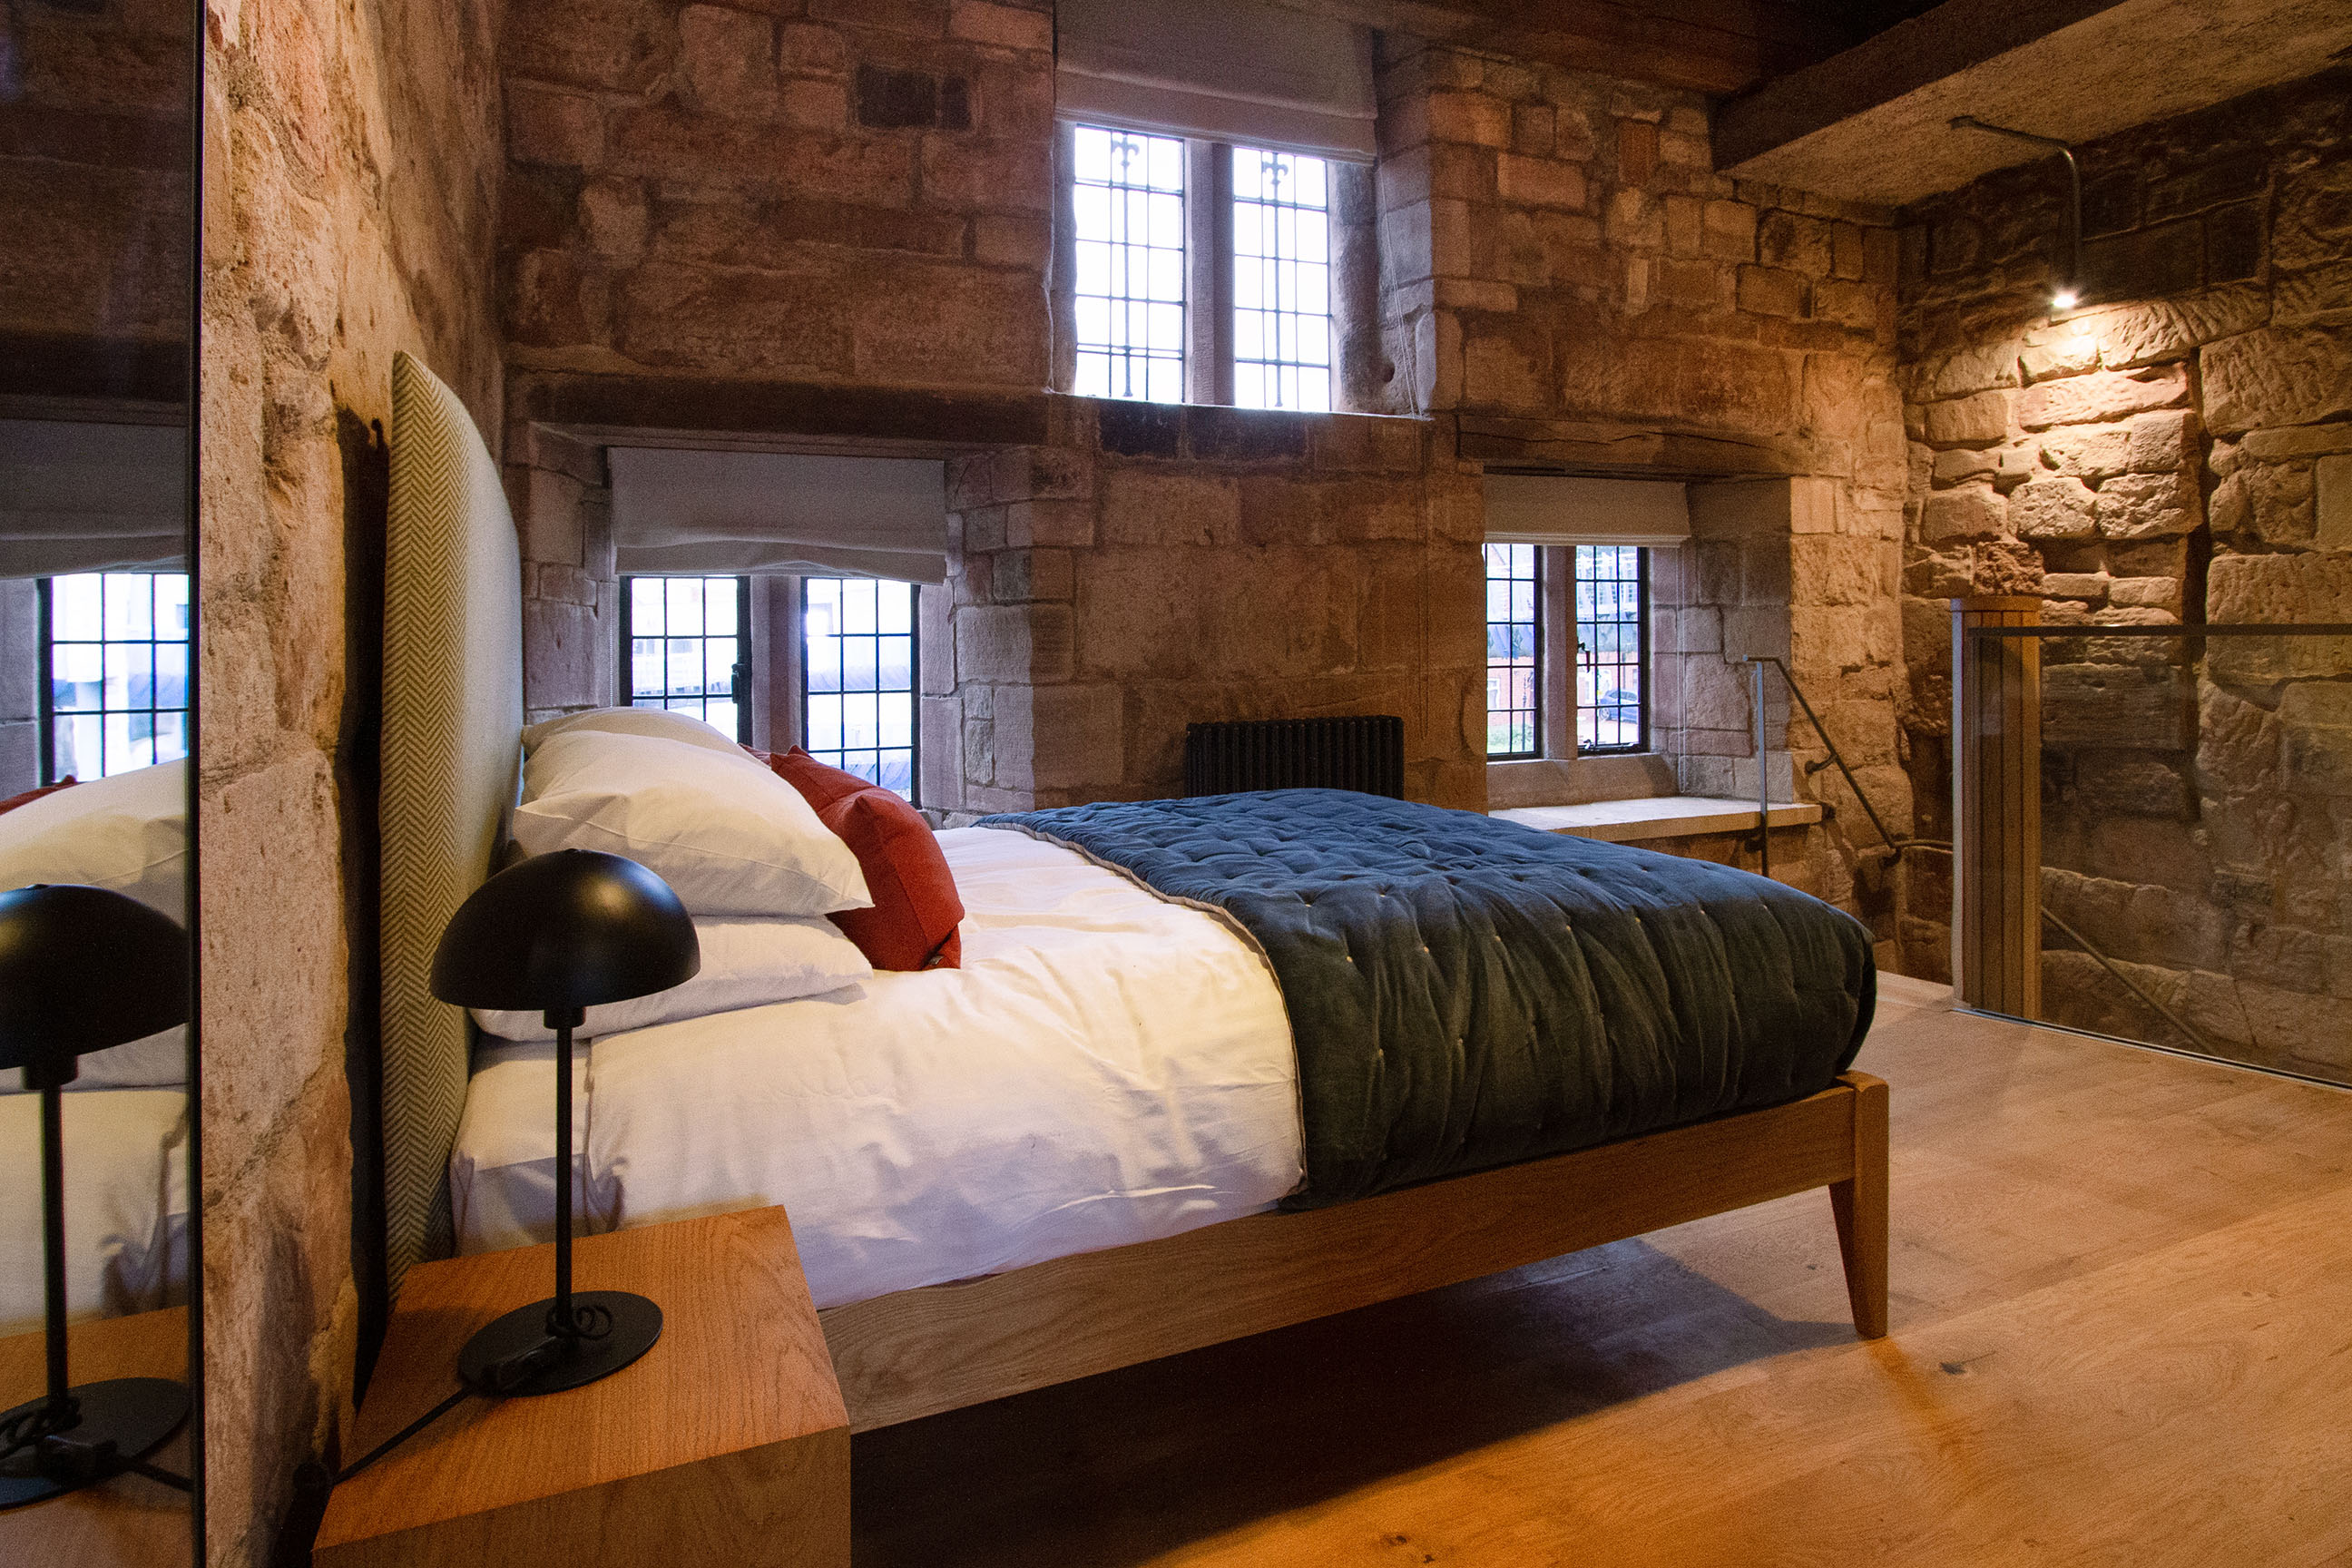 A modern double bed in a well-lit stone bedroom with three windows.